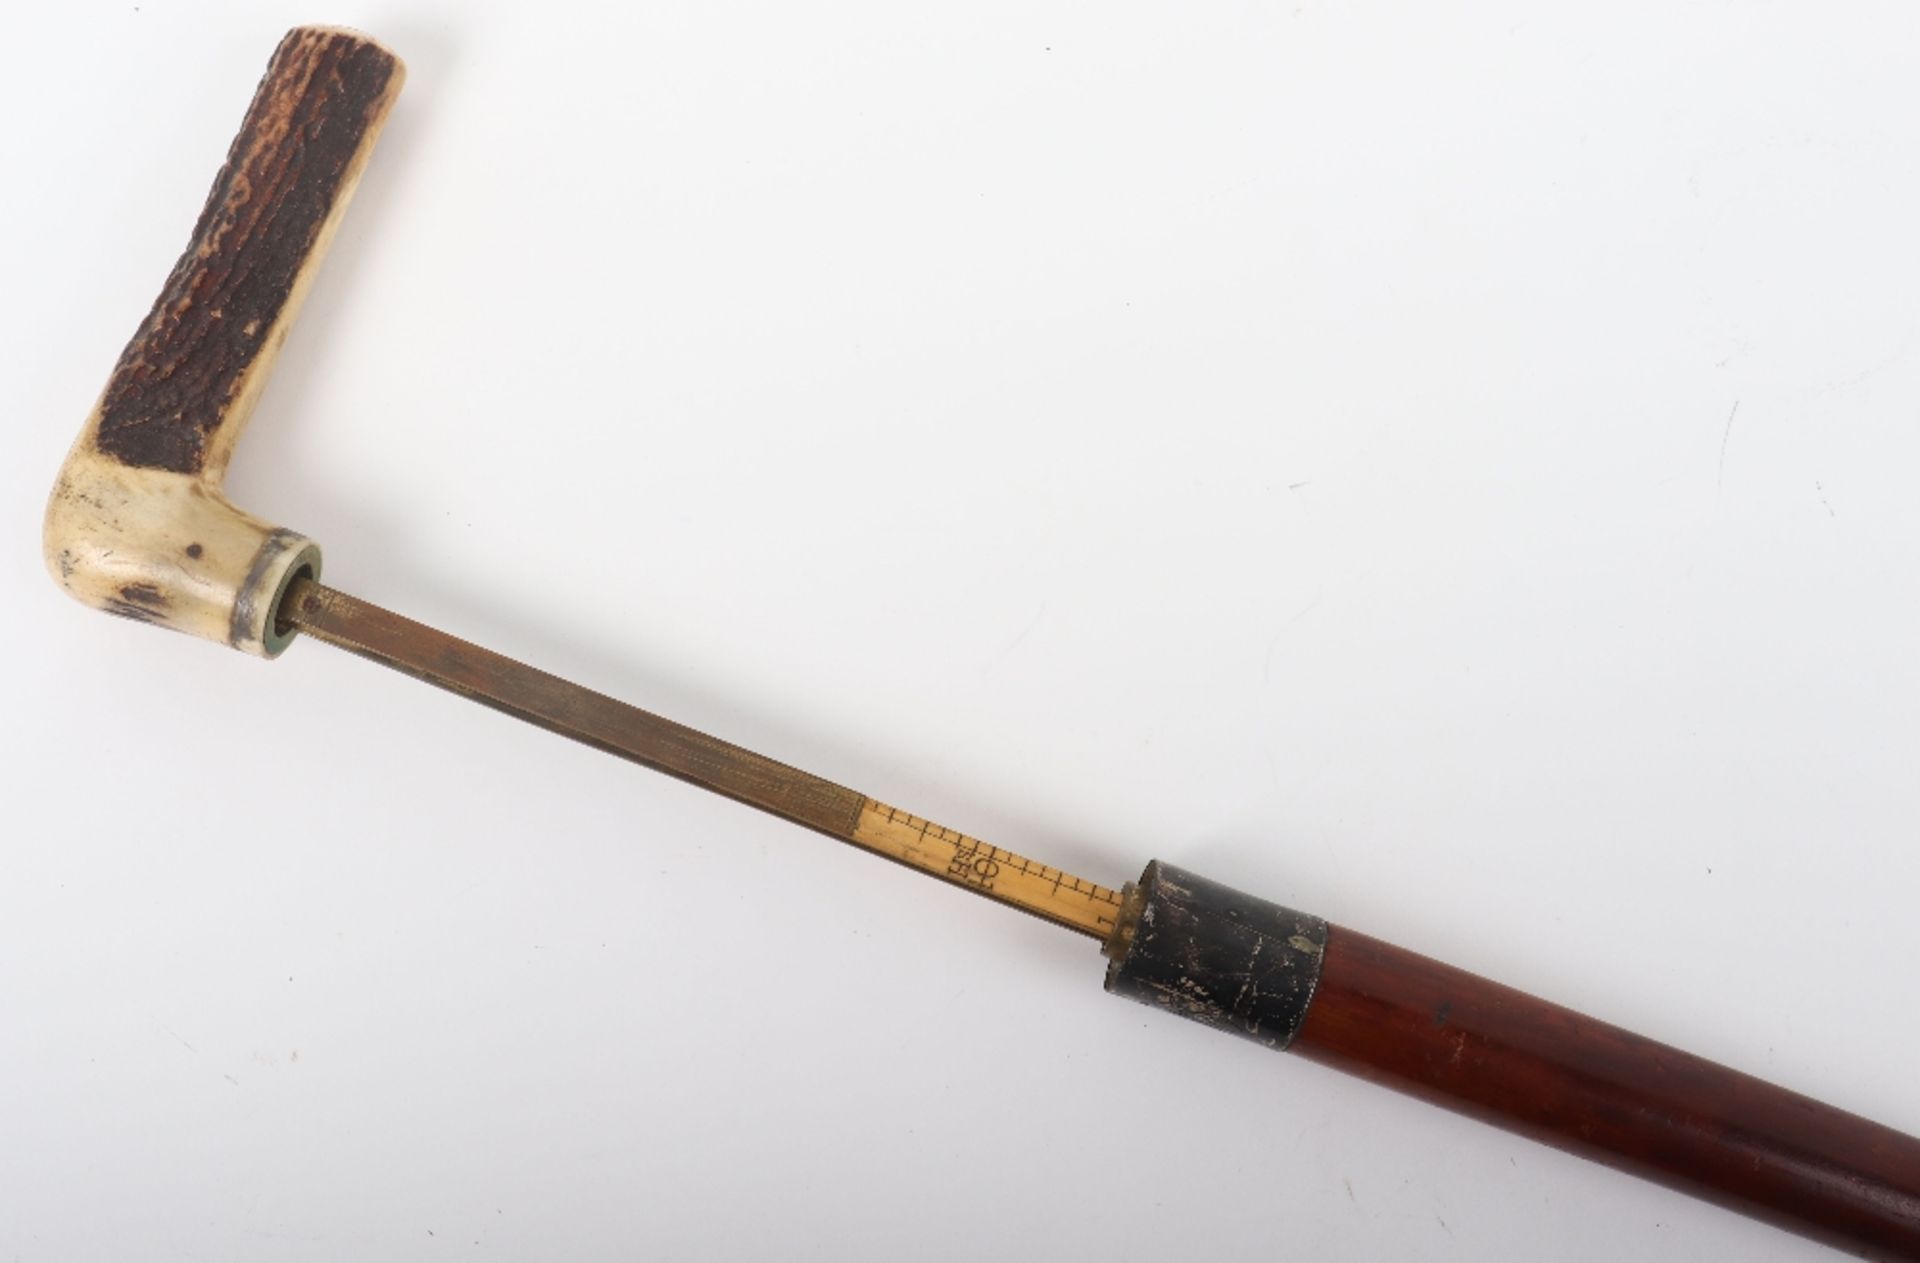 An Edwardian walking stick with spirit level (lacking liquid) and scaled ruler, with horn handle - Image 11 of 14